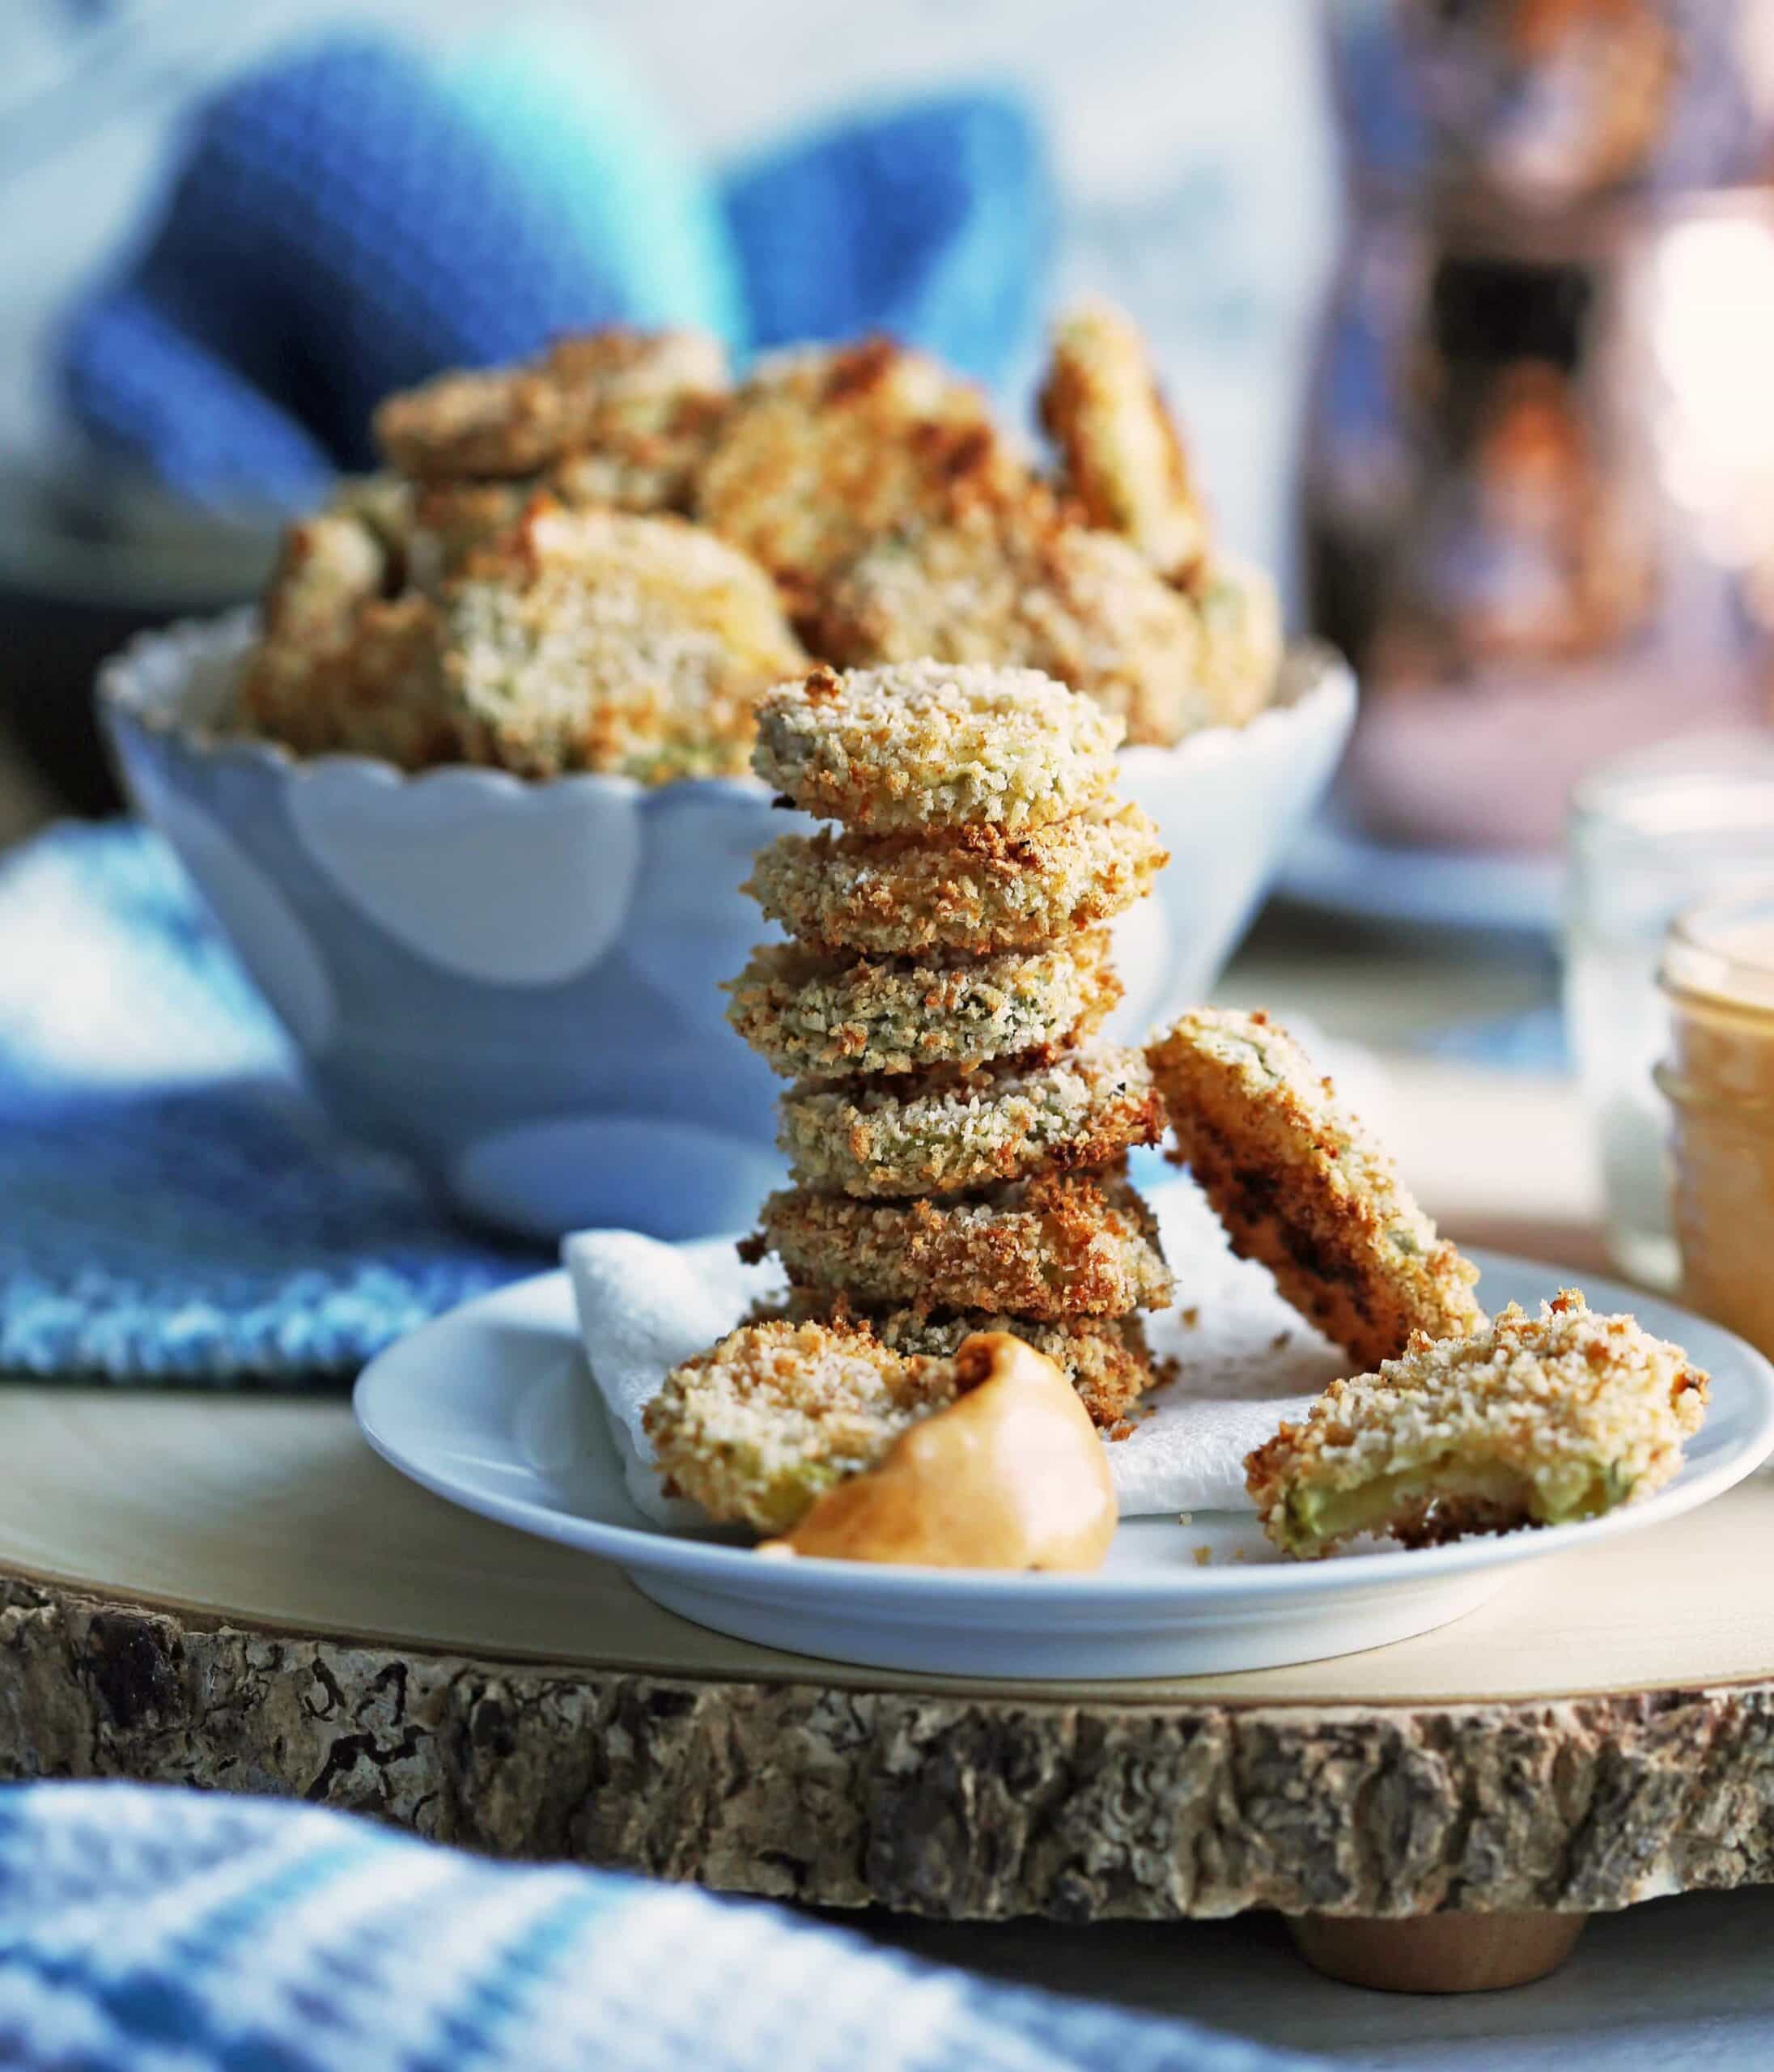 Crispy Oven-Fried Pickles with Cheddar Cheese Dip